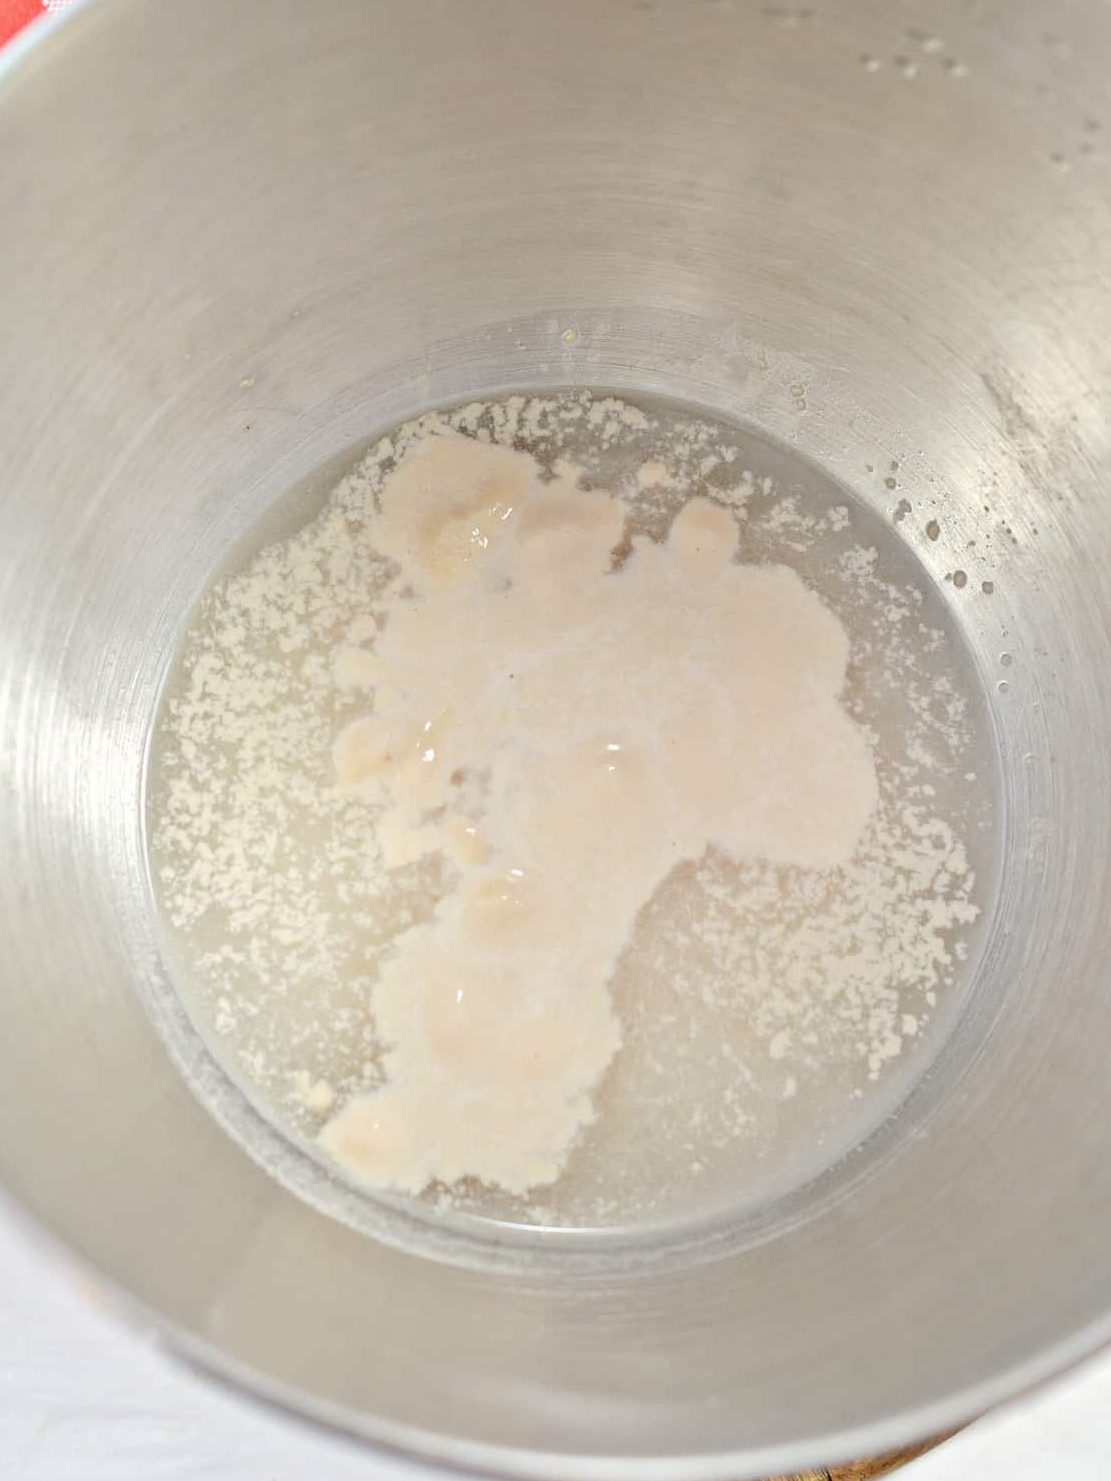 Add the yeast and water to a large mixing bowl and allow to sit to bloom for 10 minutes.